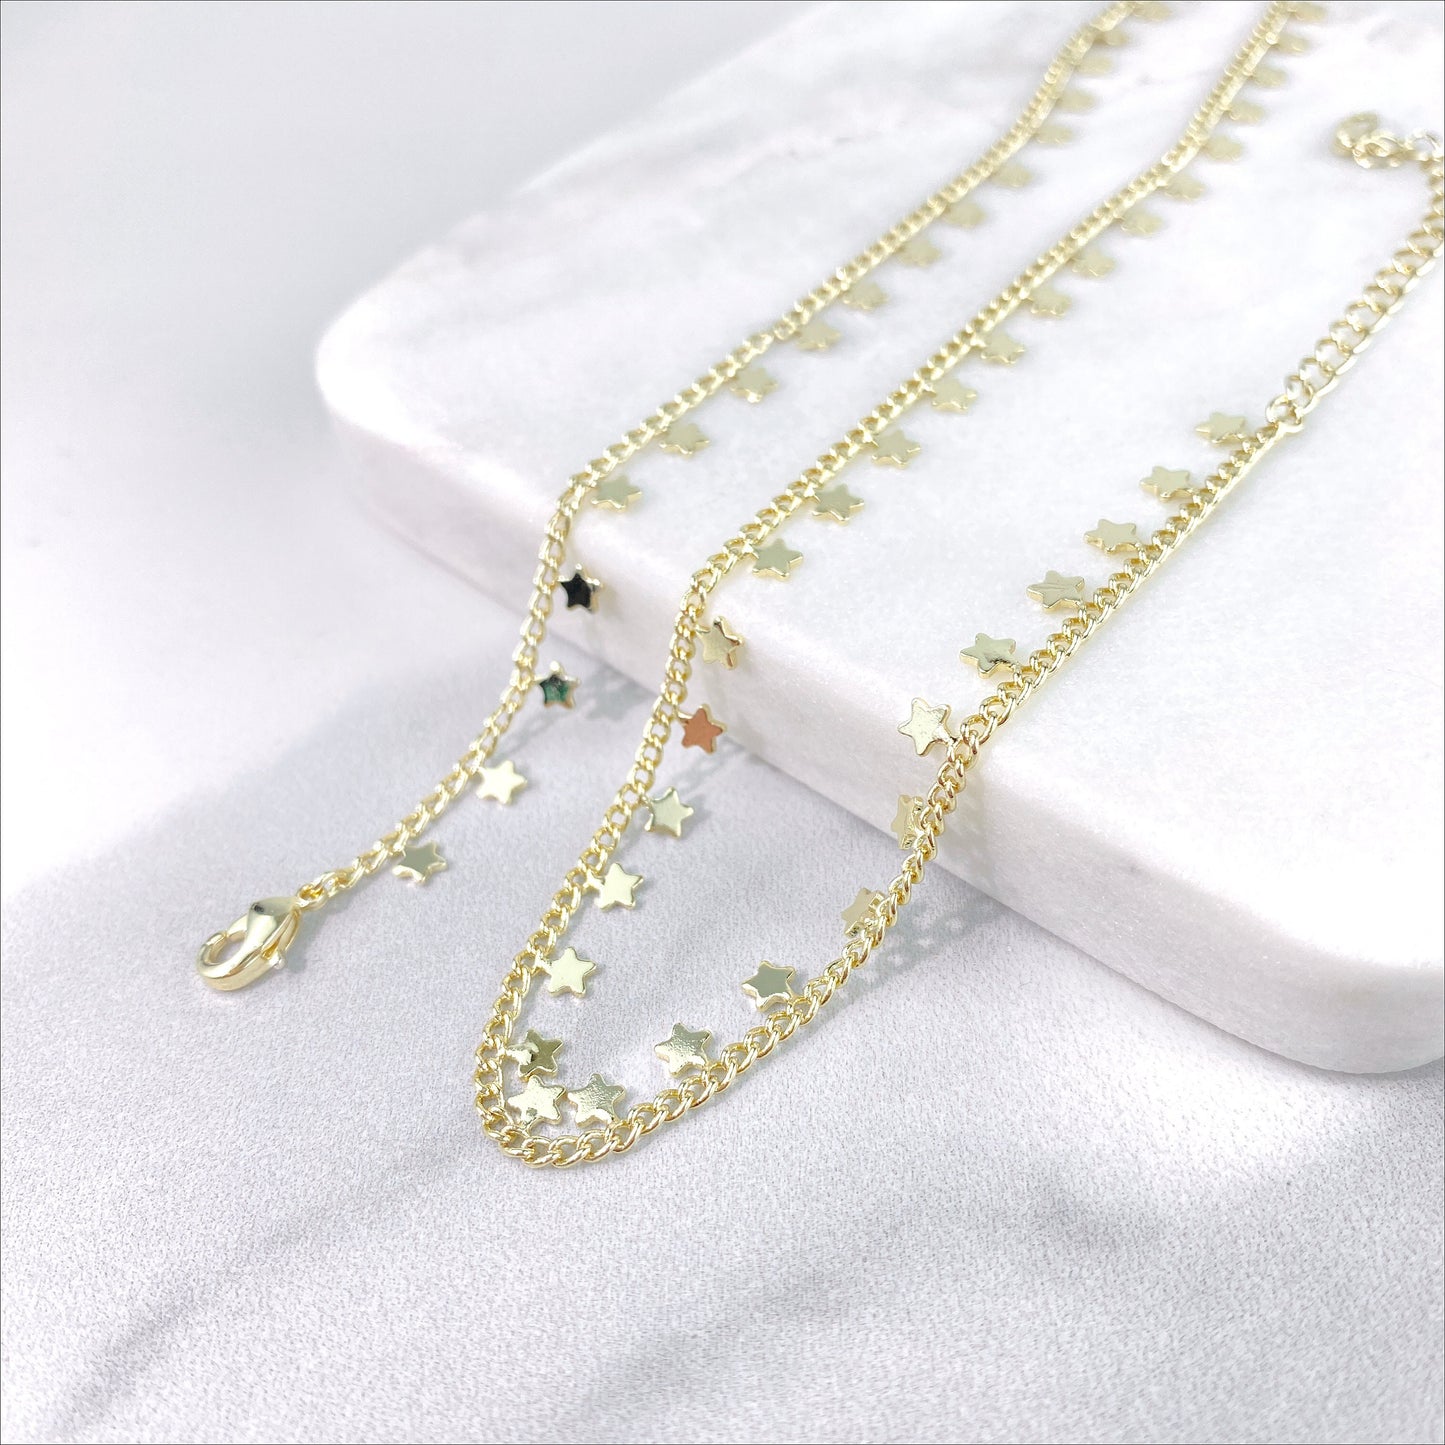 14k Gold Filled 1.6mm Curb Link Chain with Stars Necklace Bracelet or Anklet Wholesale Jewelry Supplies